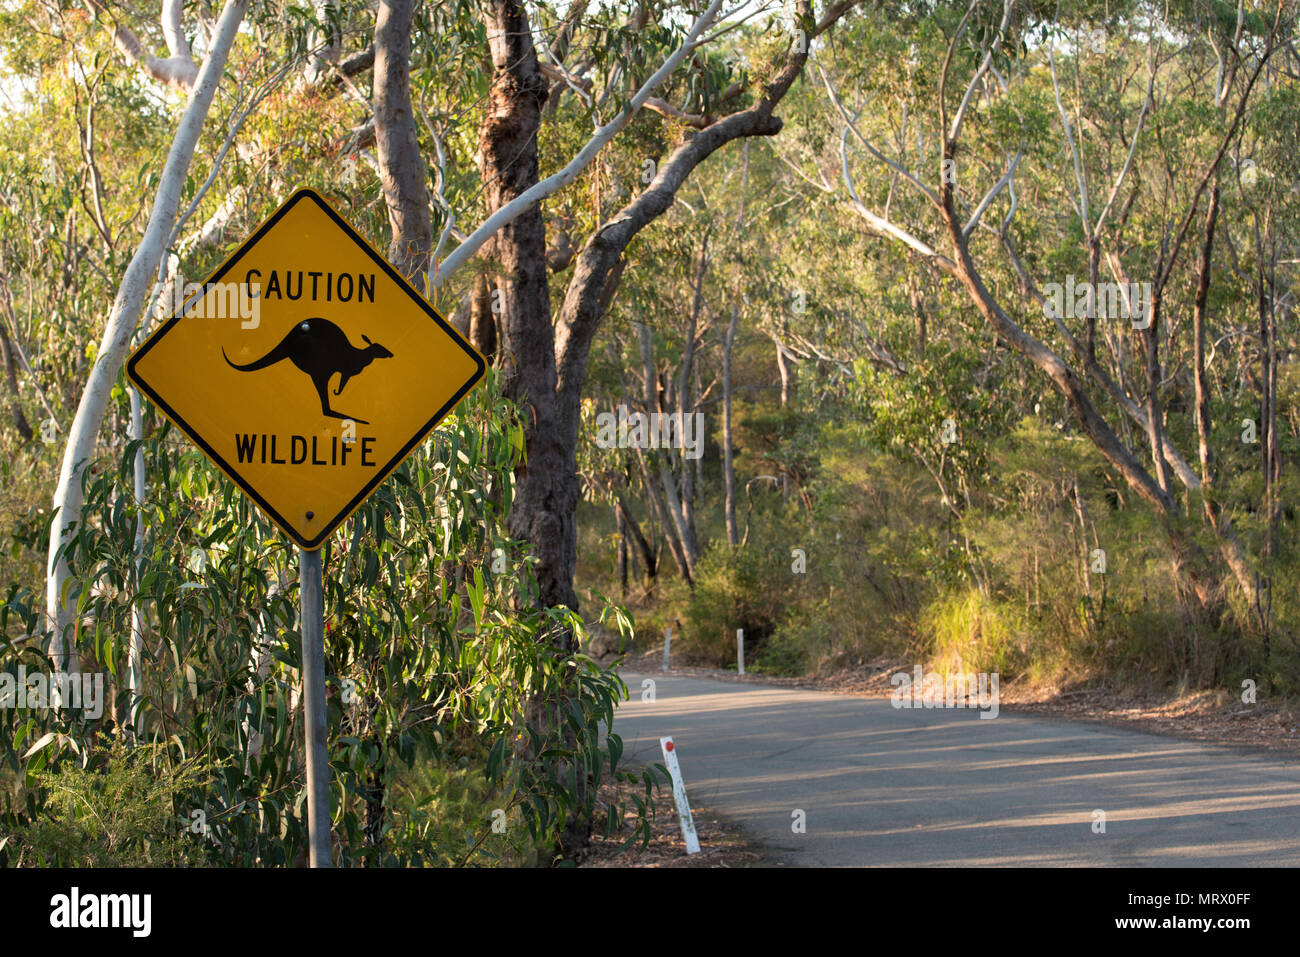 A caution wildlife warning sign in Ku-Ring-Gai Chase National Park on the road to Bobbin Head in Sydney NSW, Australia Stock Photo